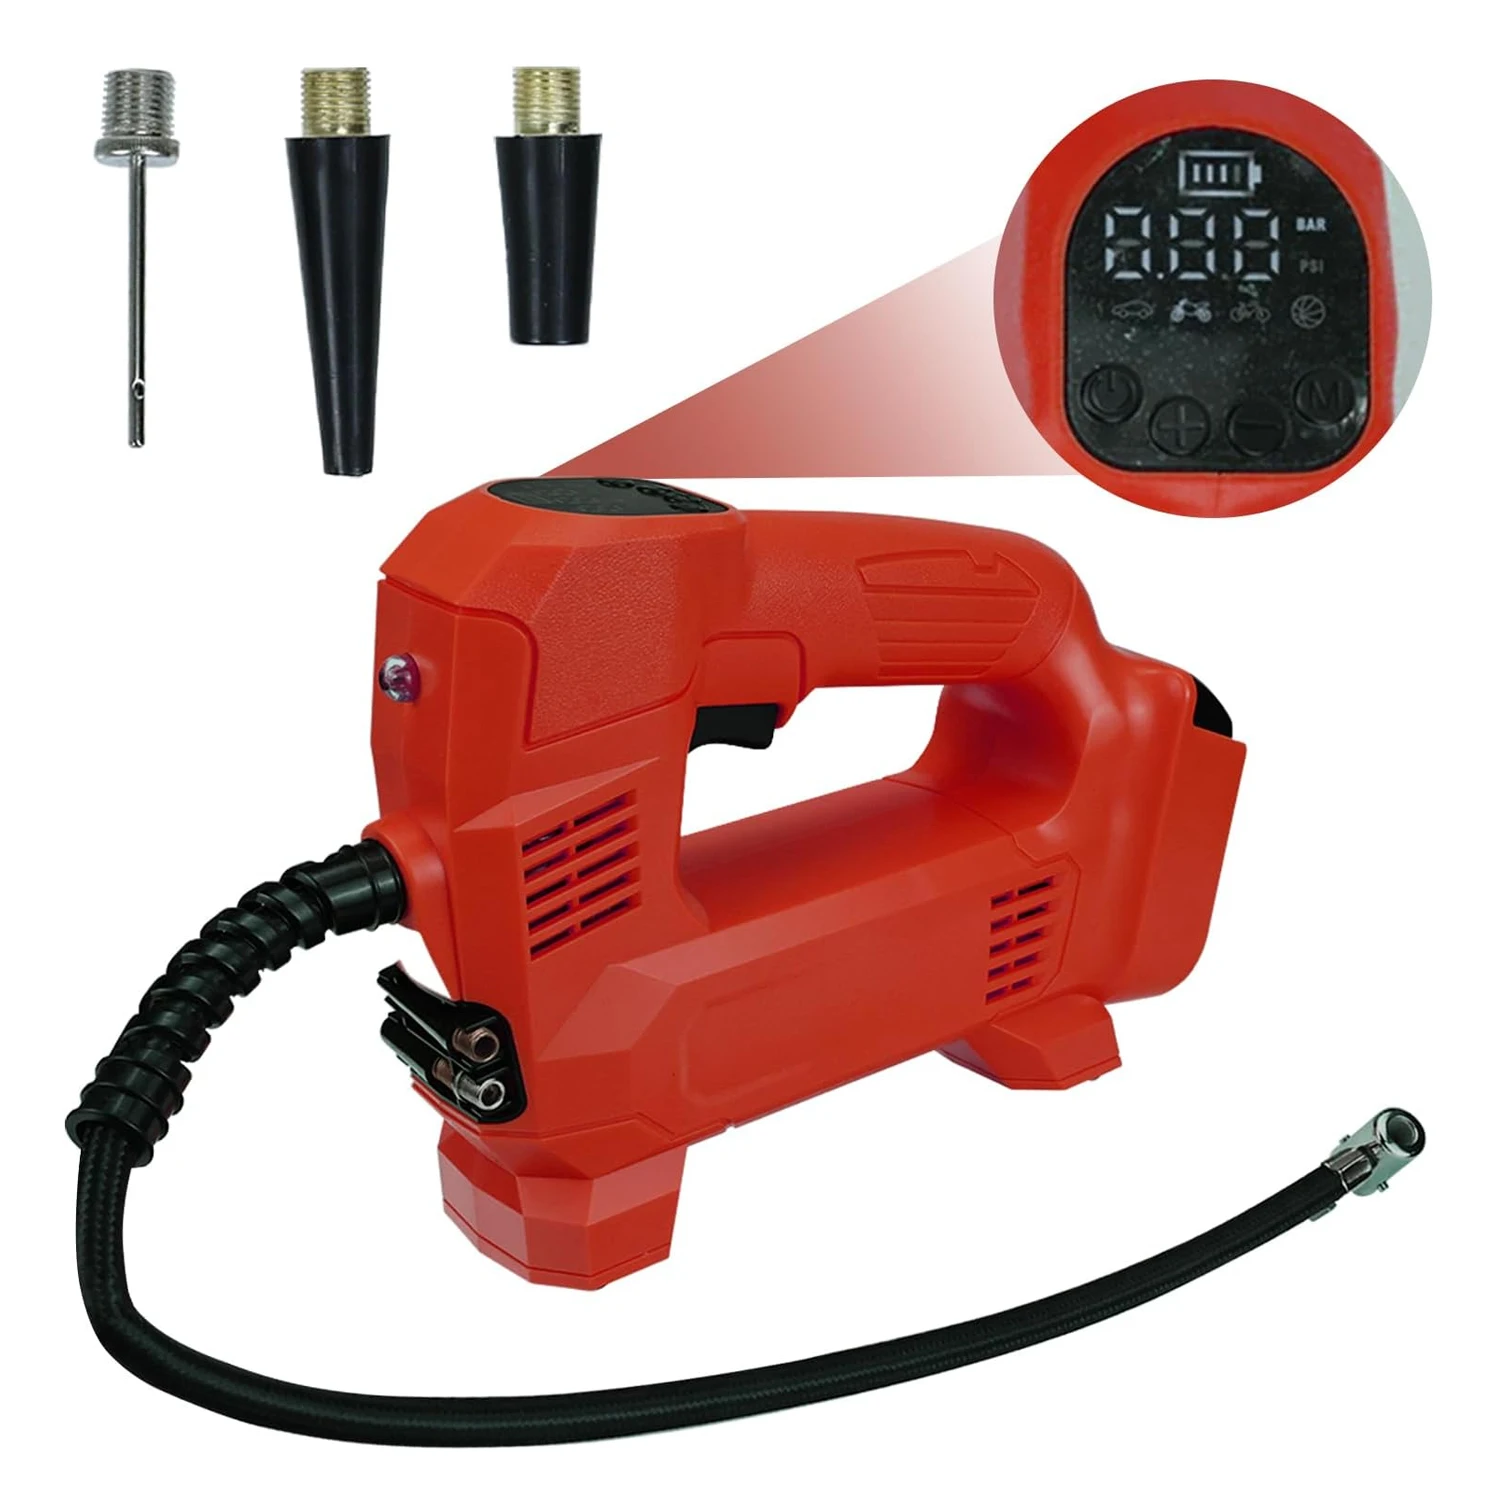 Cordless 60W Portable Air Pump for Milwaukee M18 Li-ion Battery with Digital Display Electric Power Tools